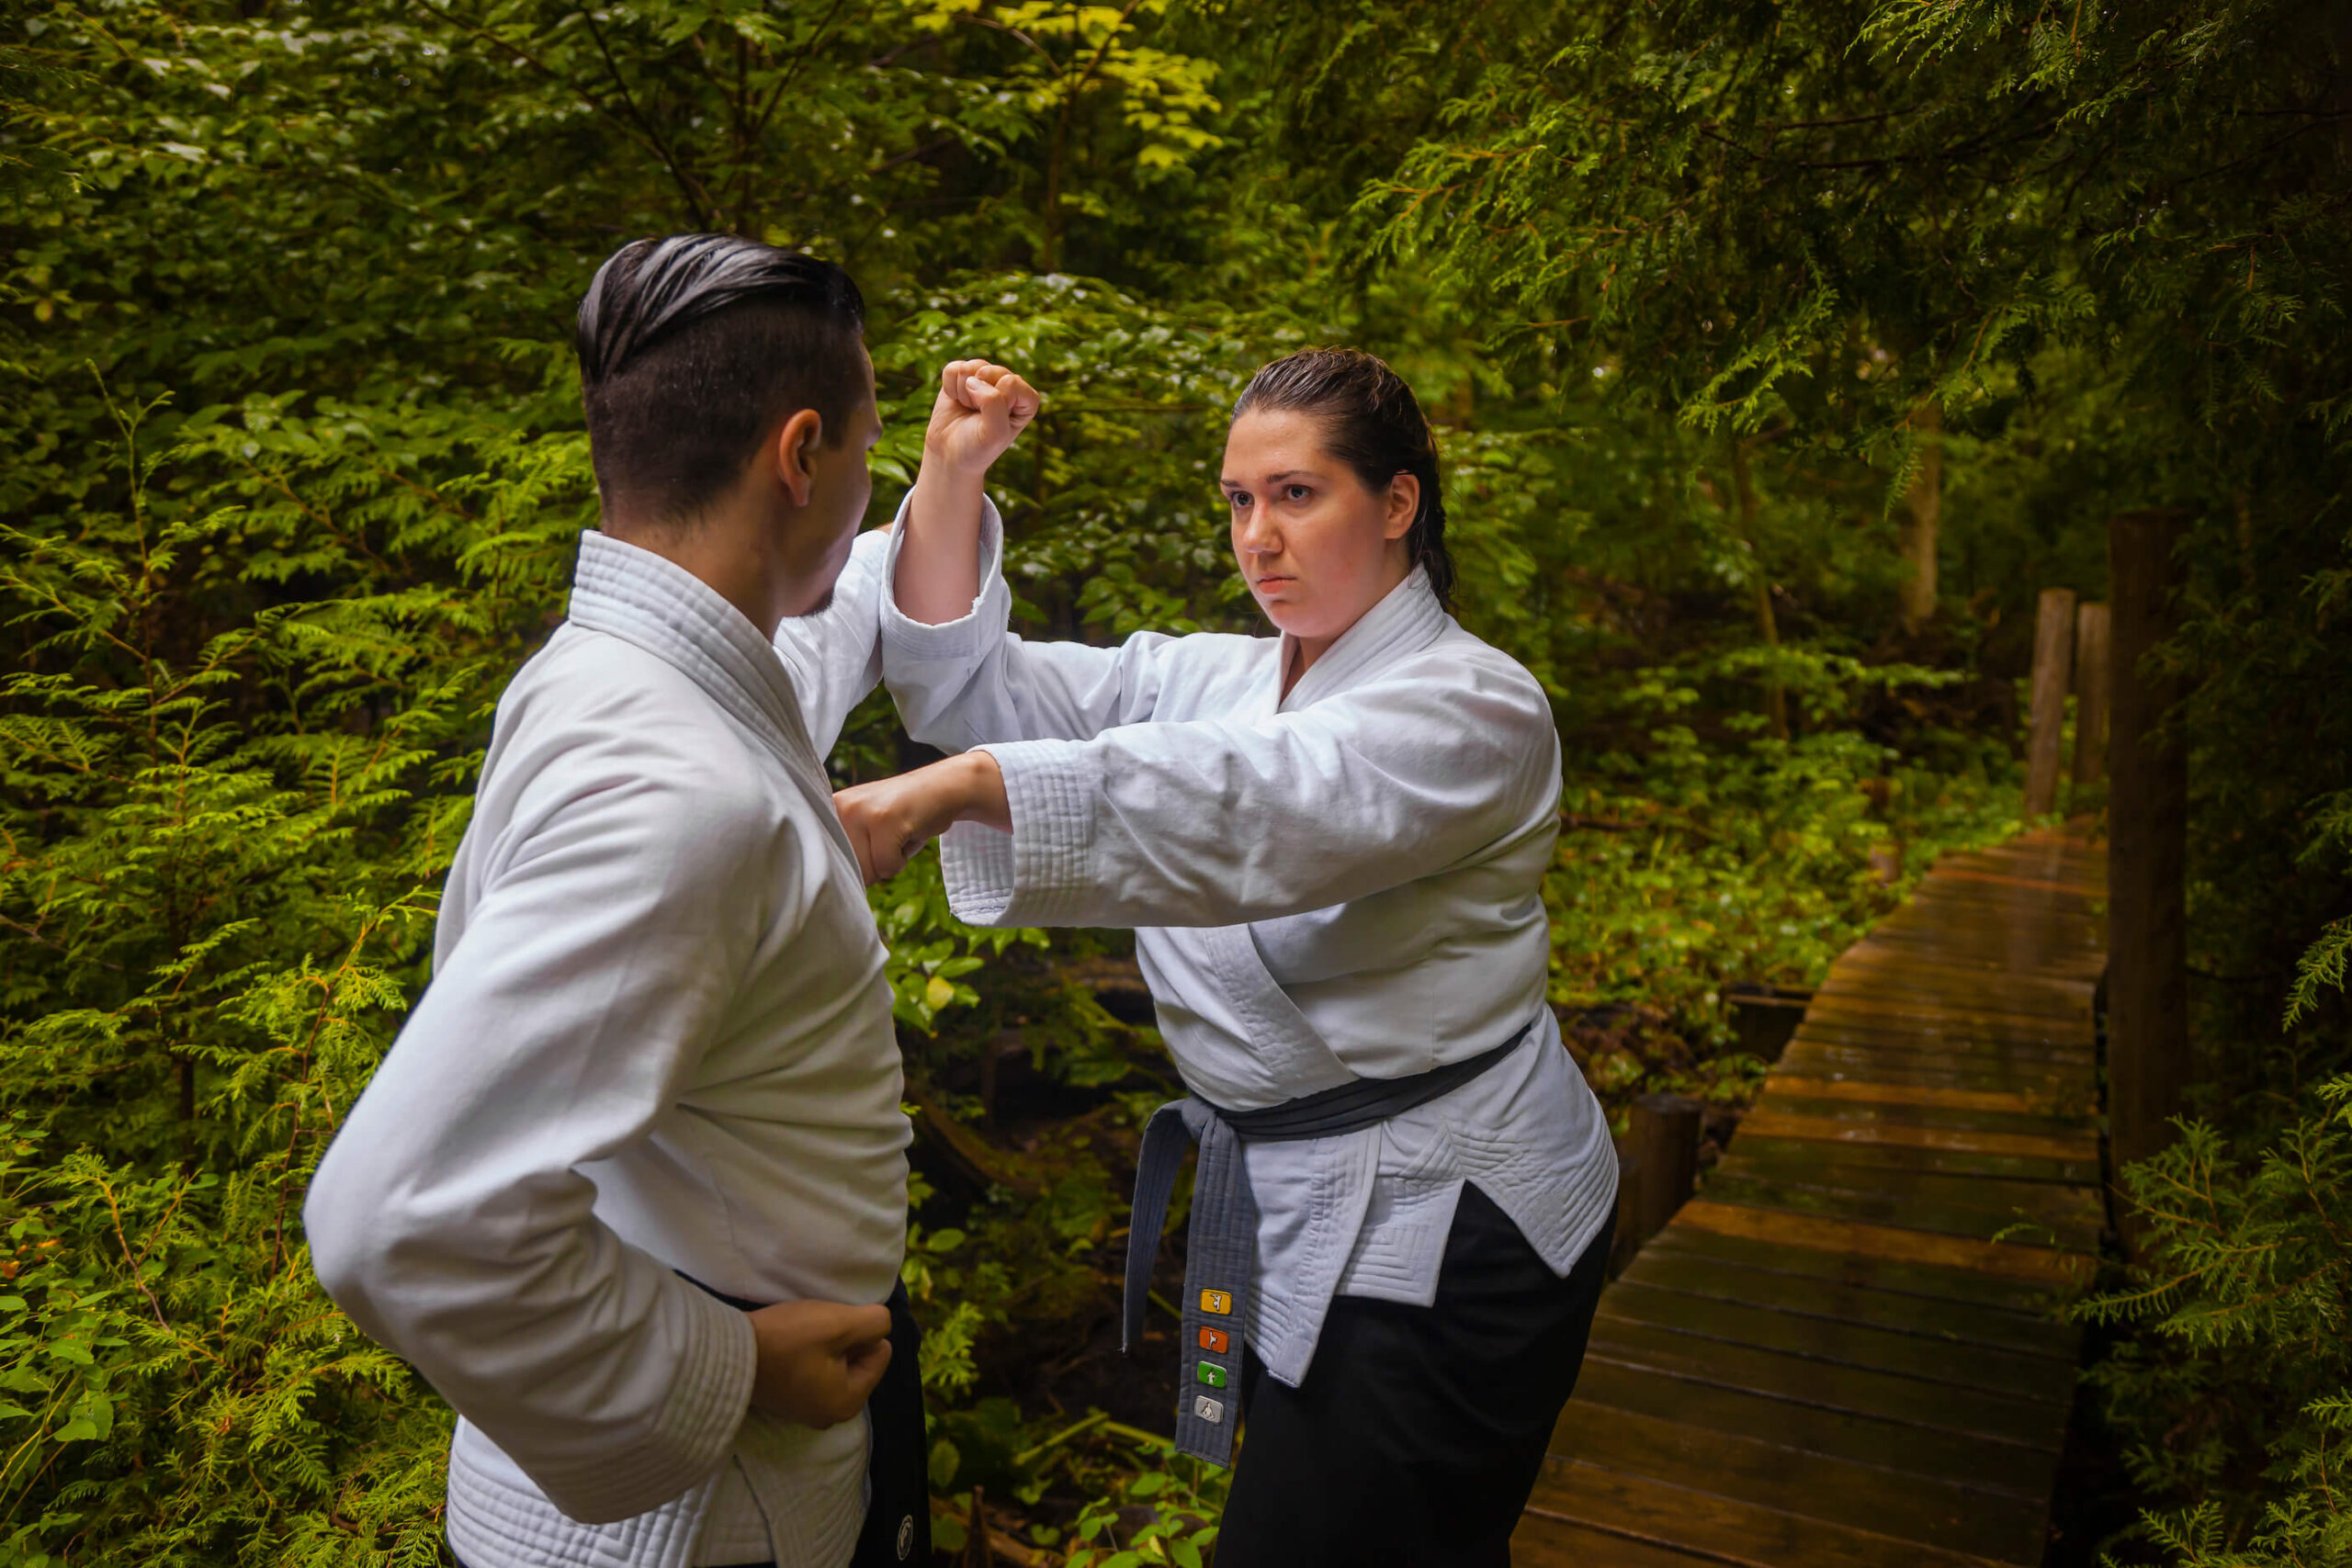 7 Common Questions About Getting Started with Martial Arts